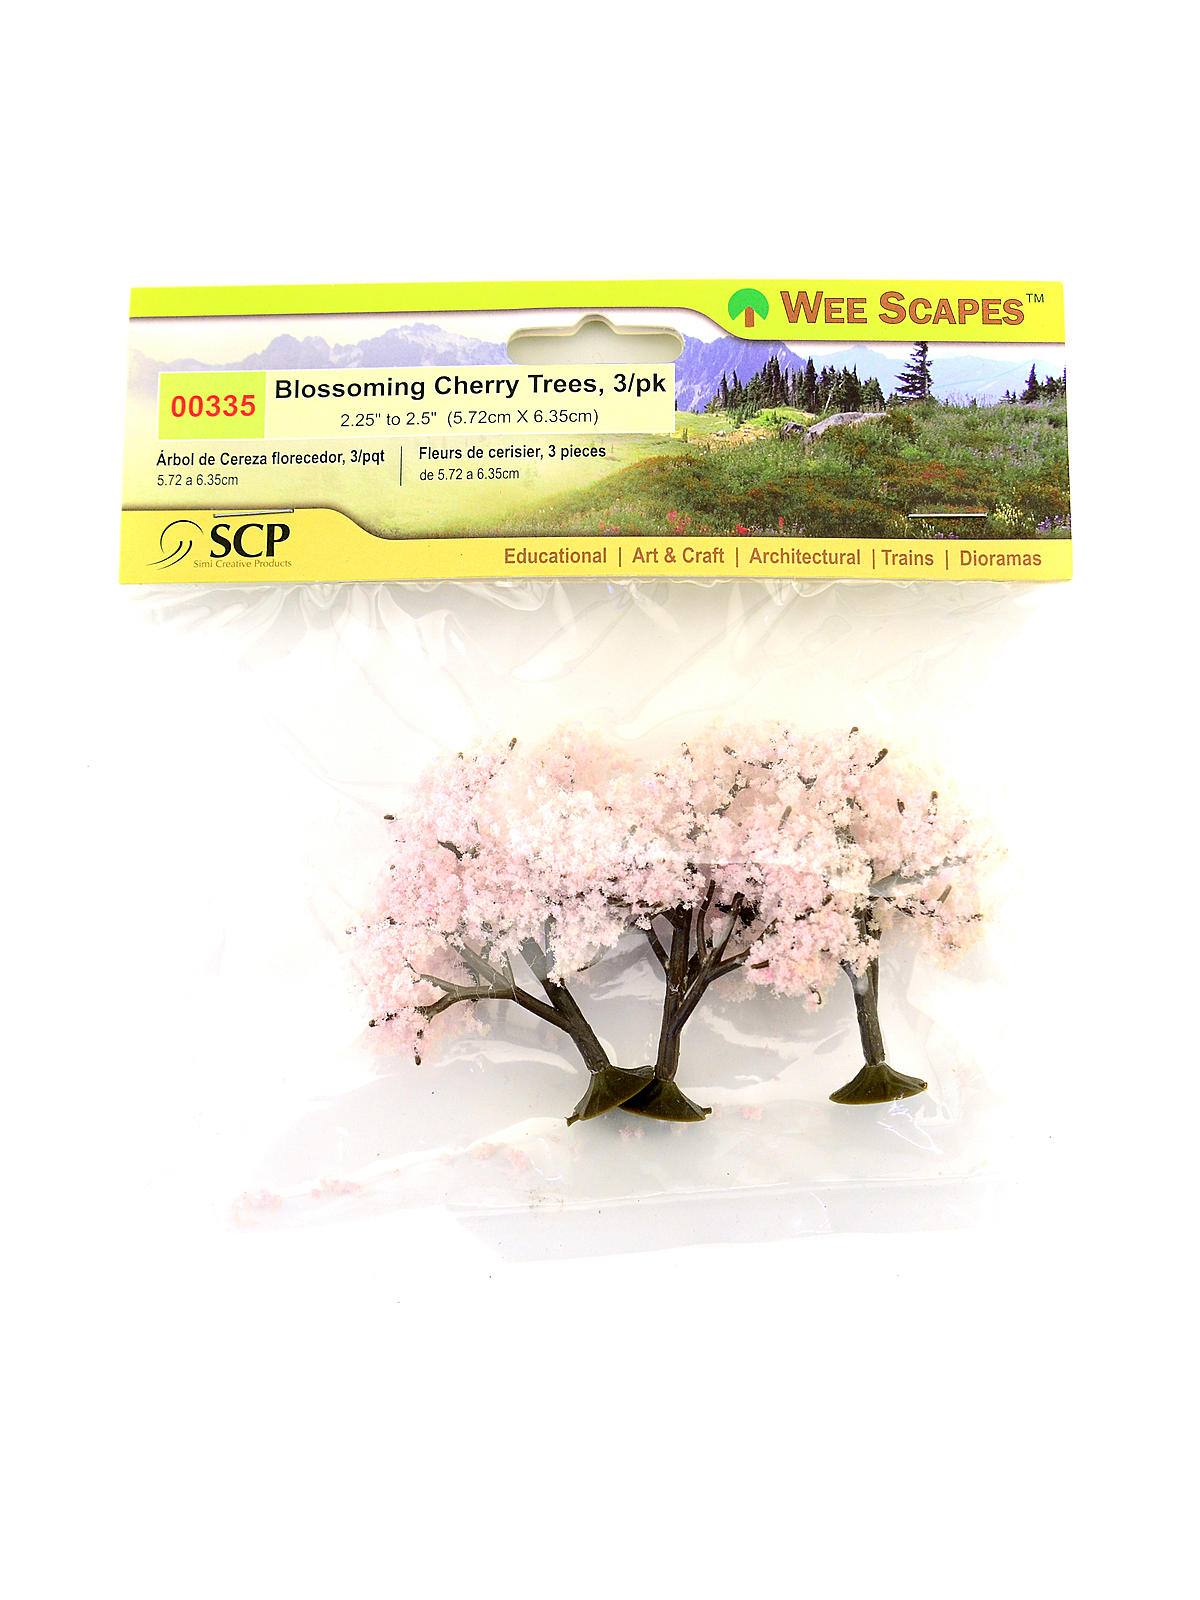 Architectural Model Trees Blossoming Cherry Trees 2 1 4 In. - 2 1 2 In. Pack Of 3